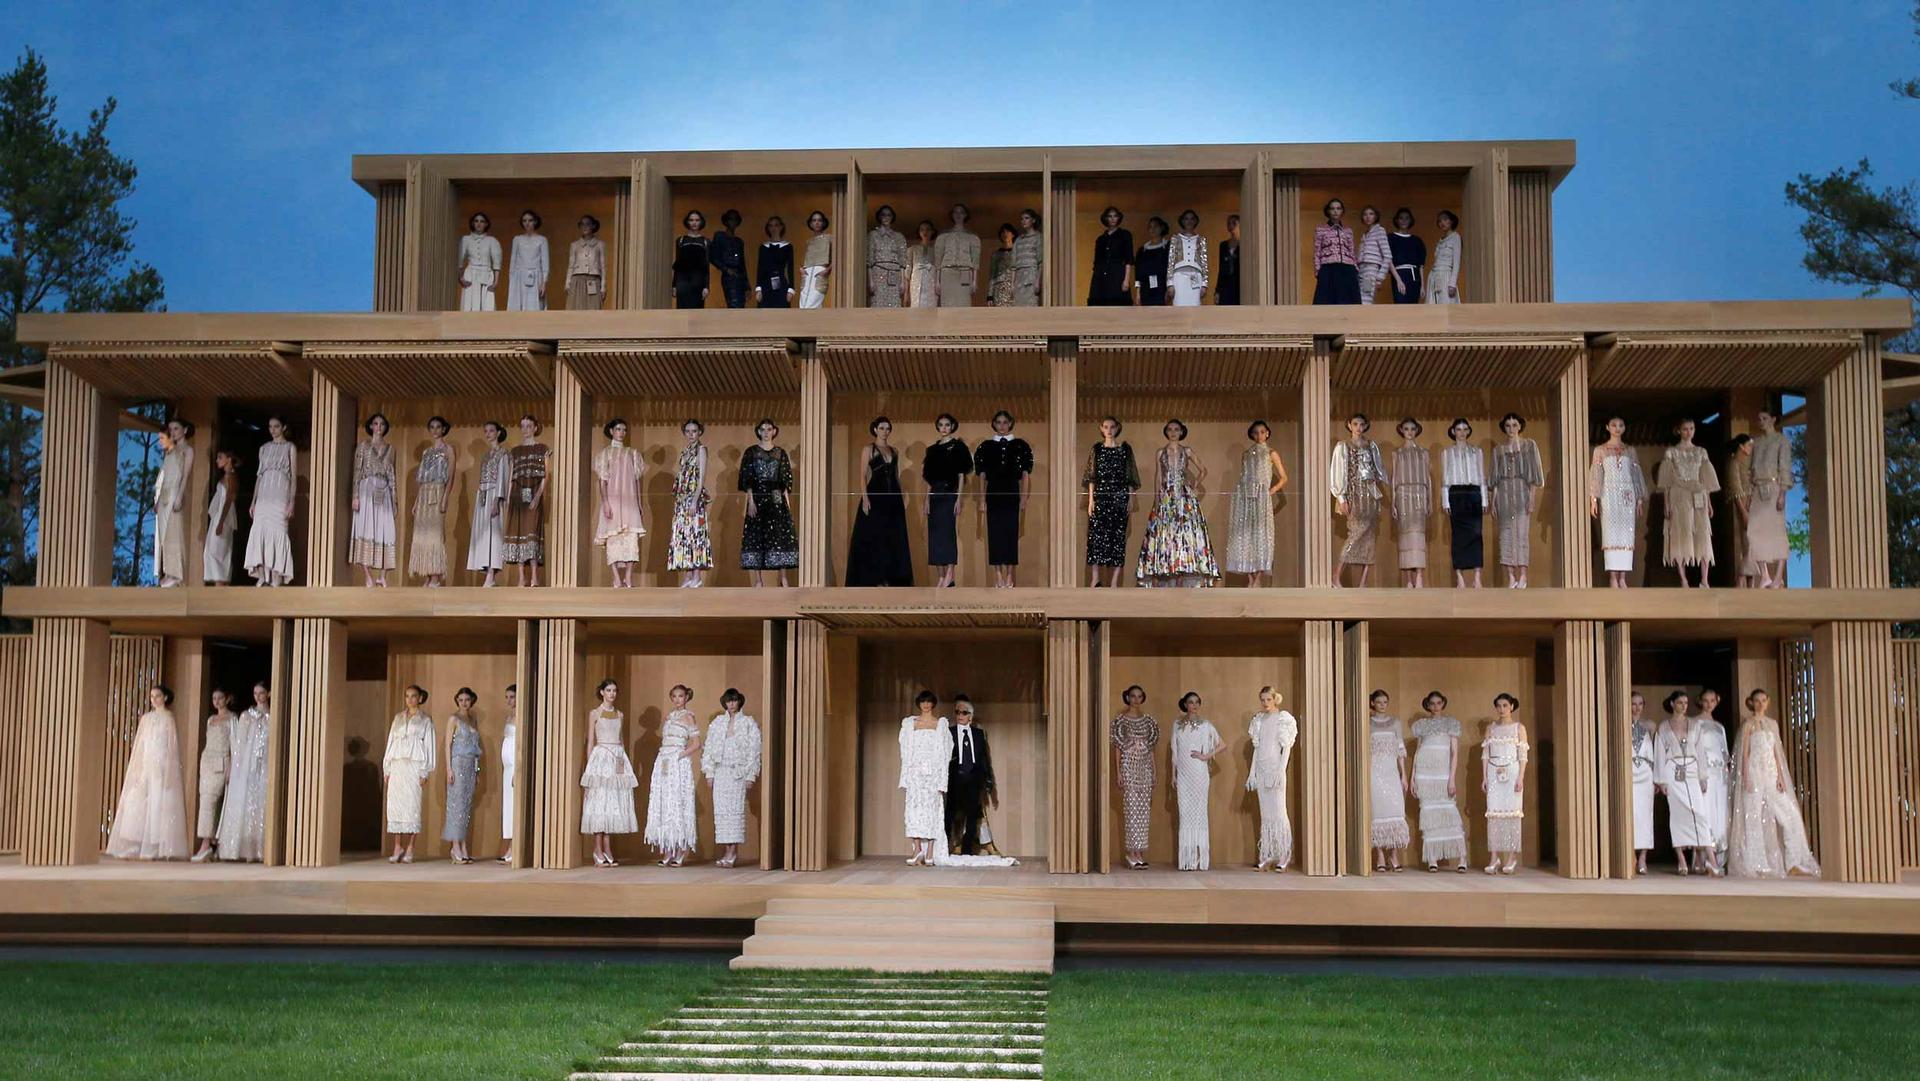 Models are standing on three levels of a wooden house as part of a spring fashion show.